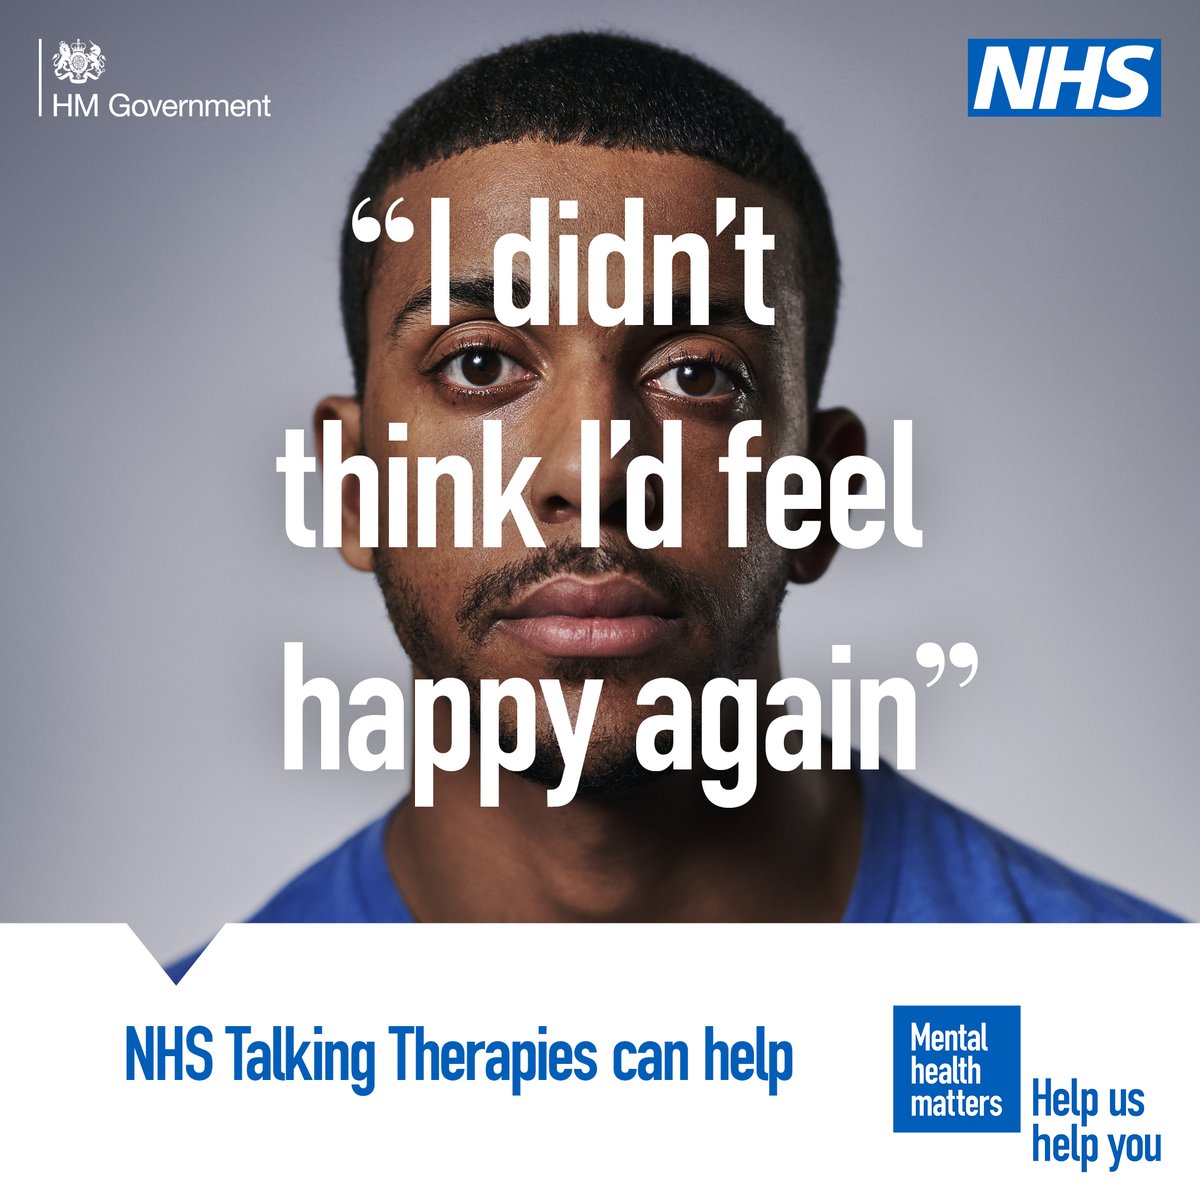 Struggling with feelings of depression, excessive worry, social anxiety, post-traumatic stress or obsessions and compulsions? NHS Talking Therapies can help. The service is effective, confidential and free💙 Your GP can refer you or refer yourself at orlo.uk/KWukc